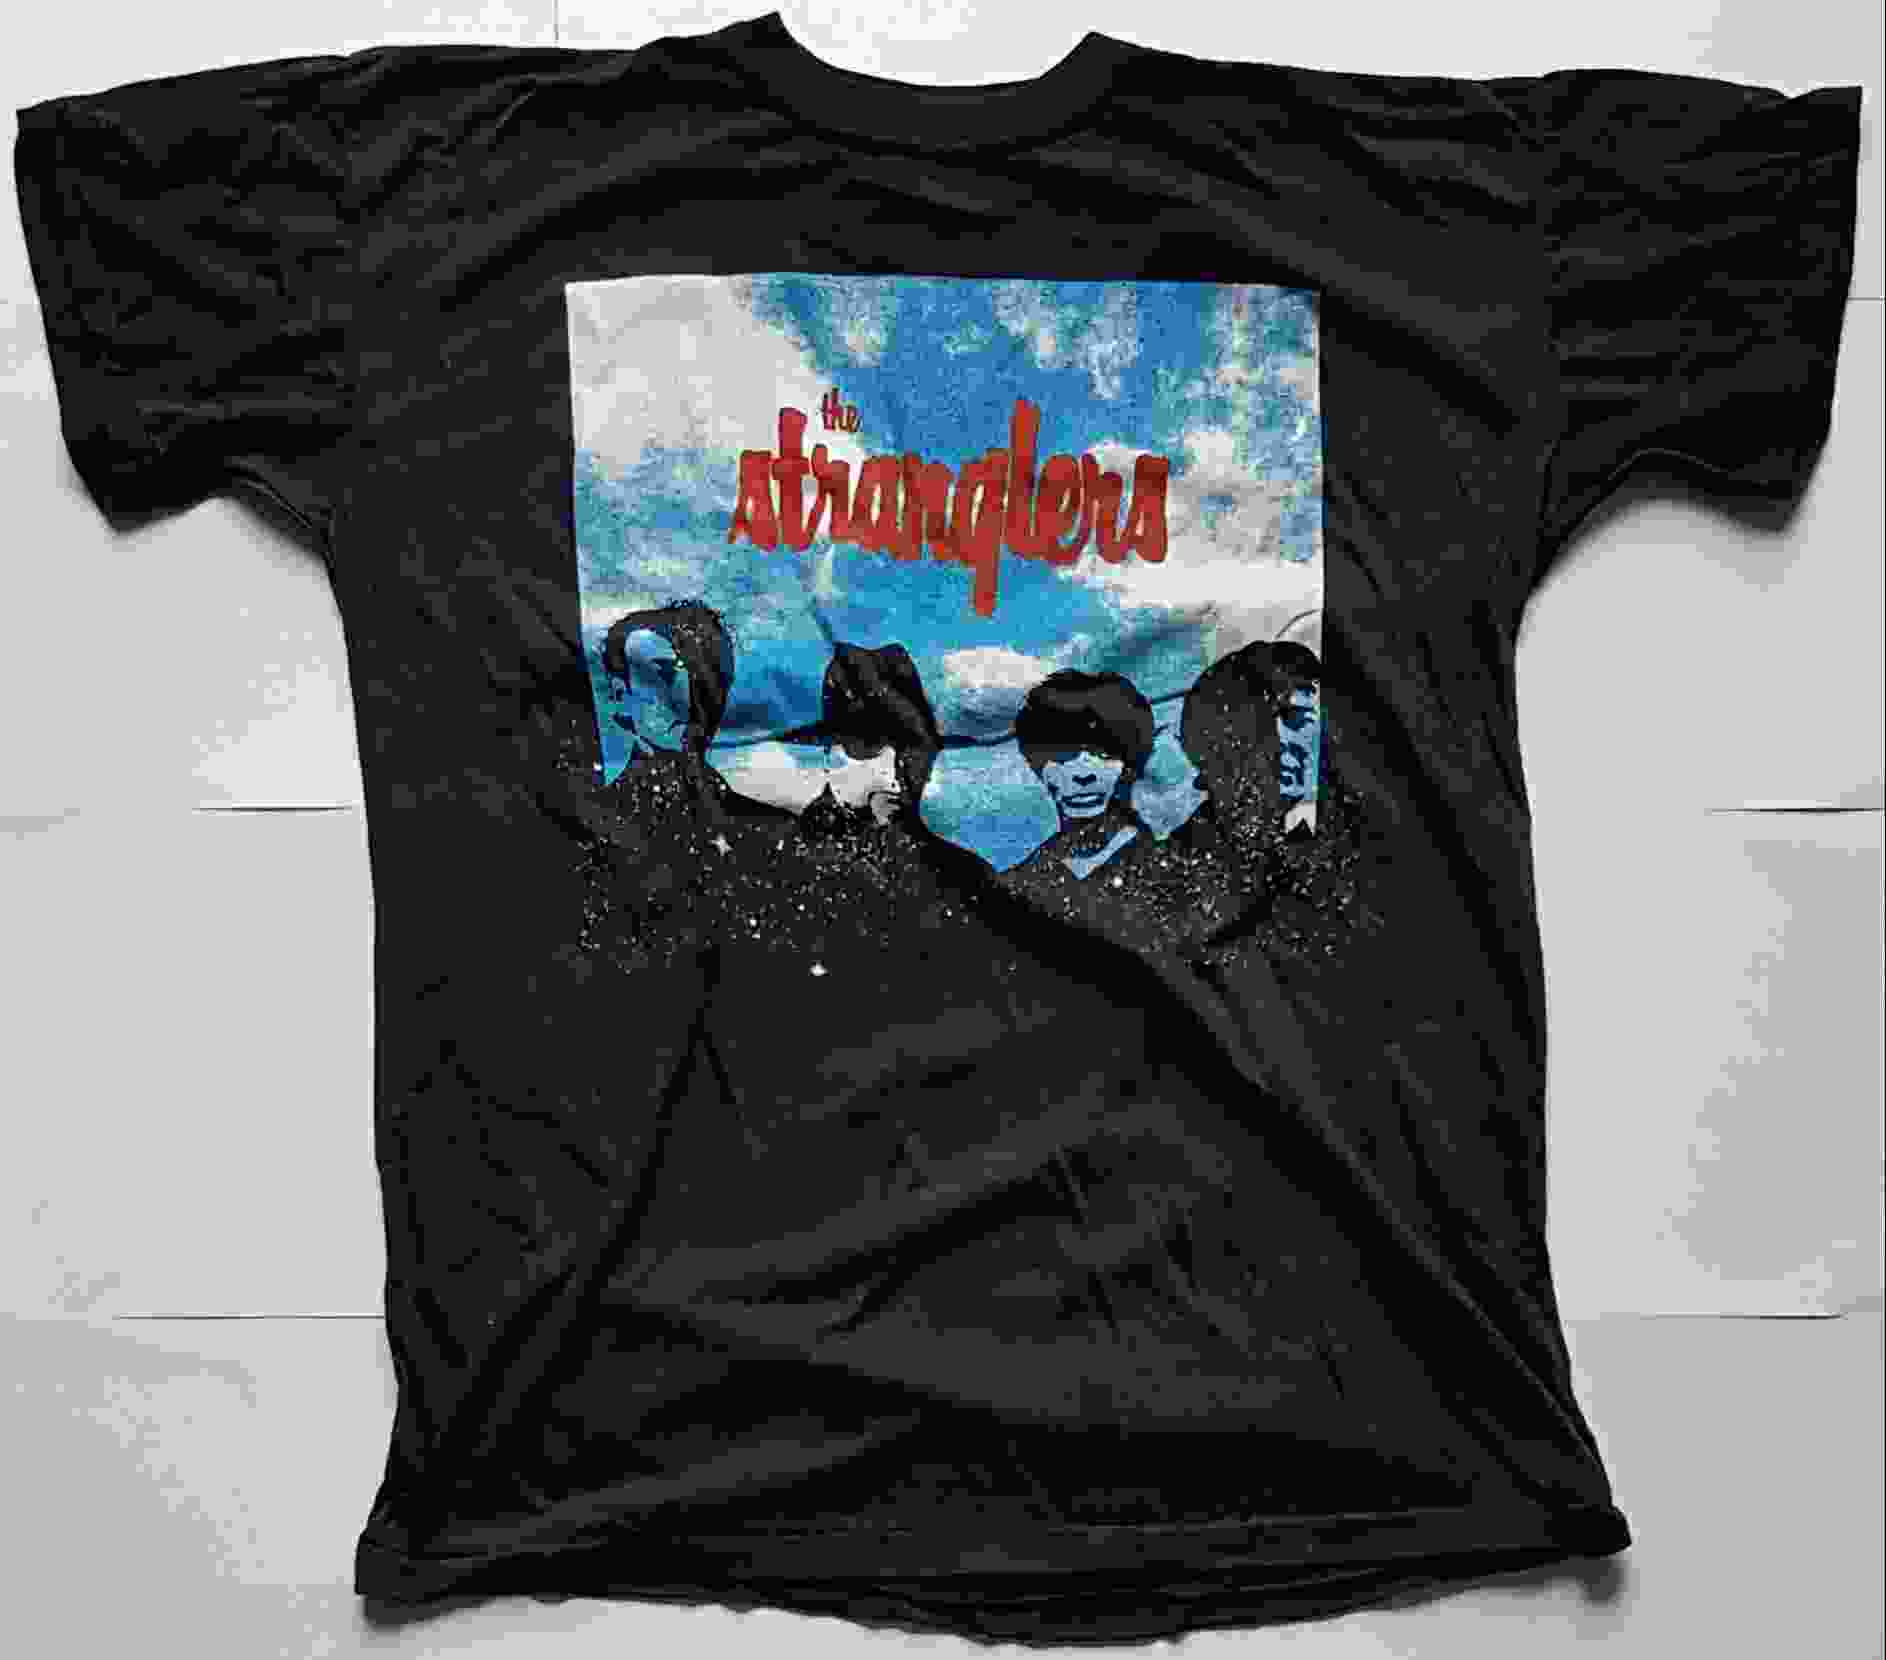 Picture of Dreamtime U.K. tour 2 by artist The Stranglers from The Stranglers clothes